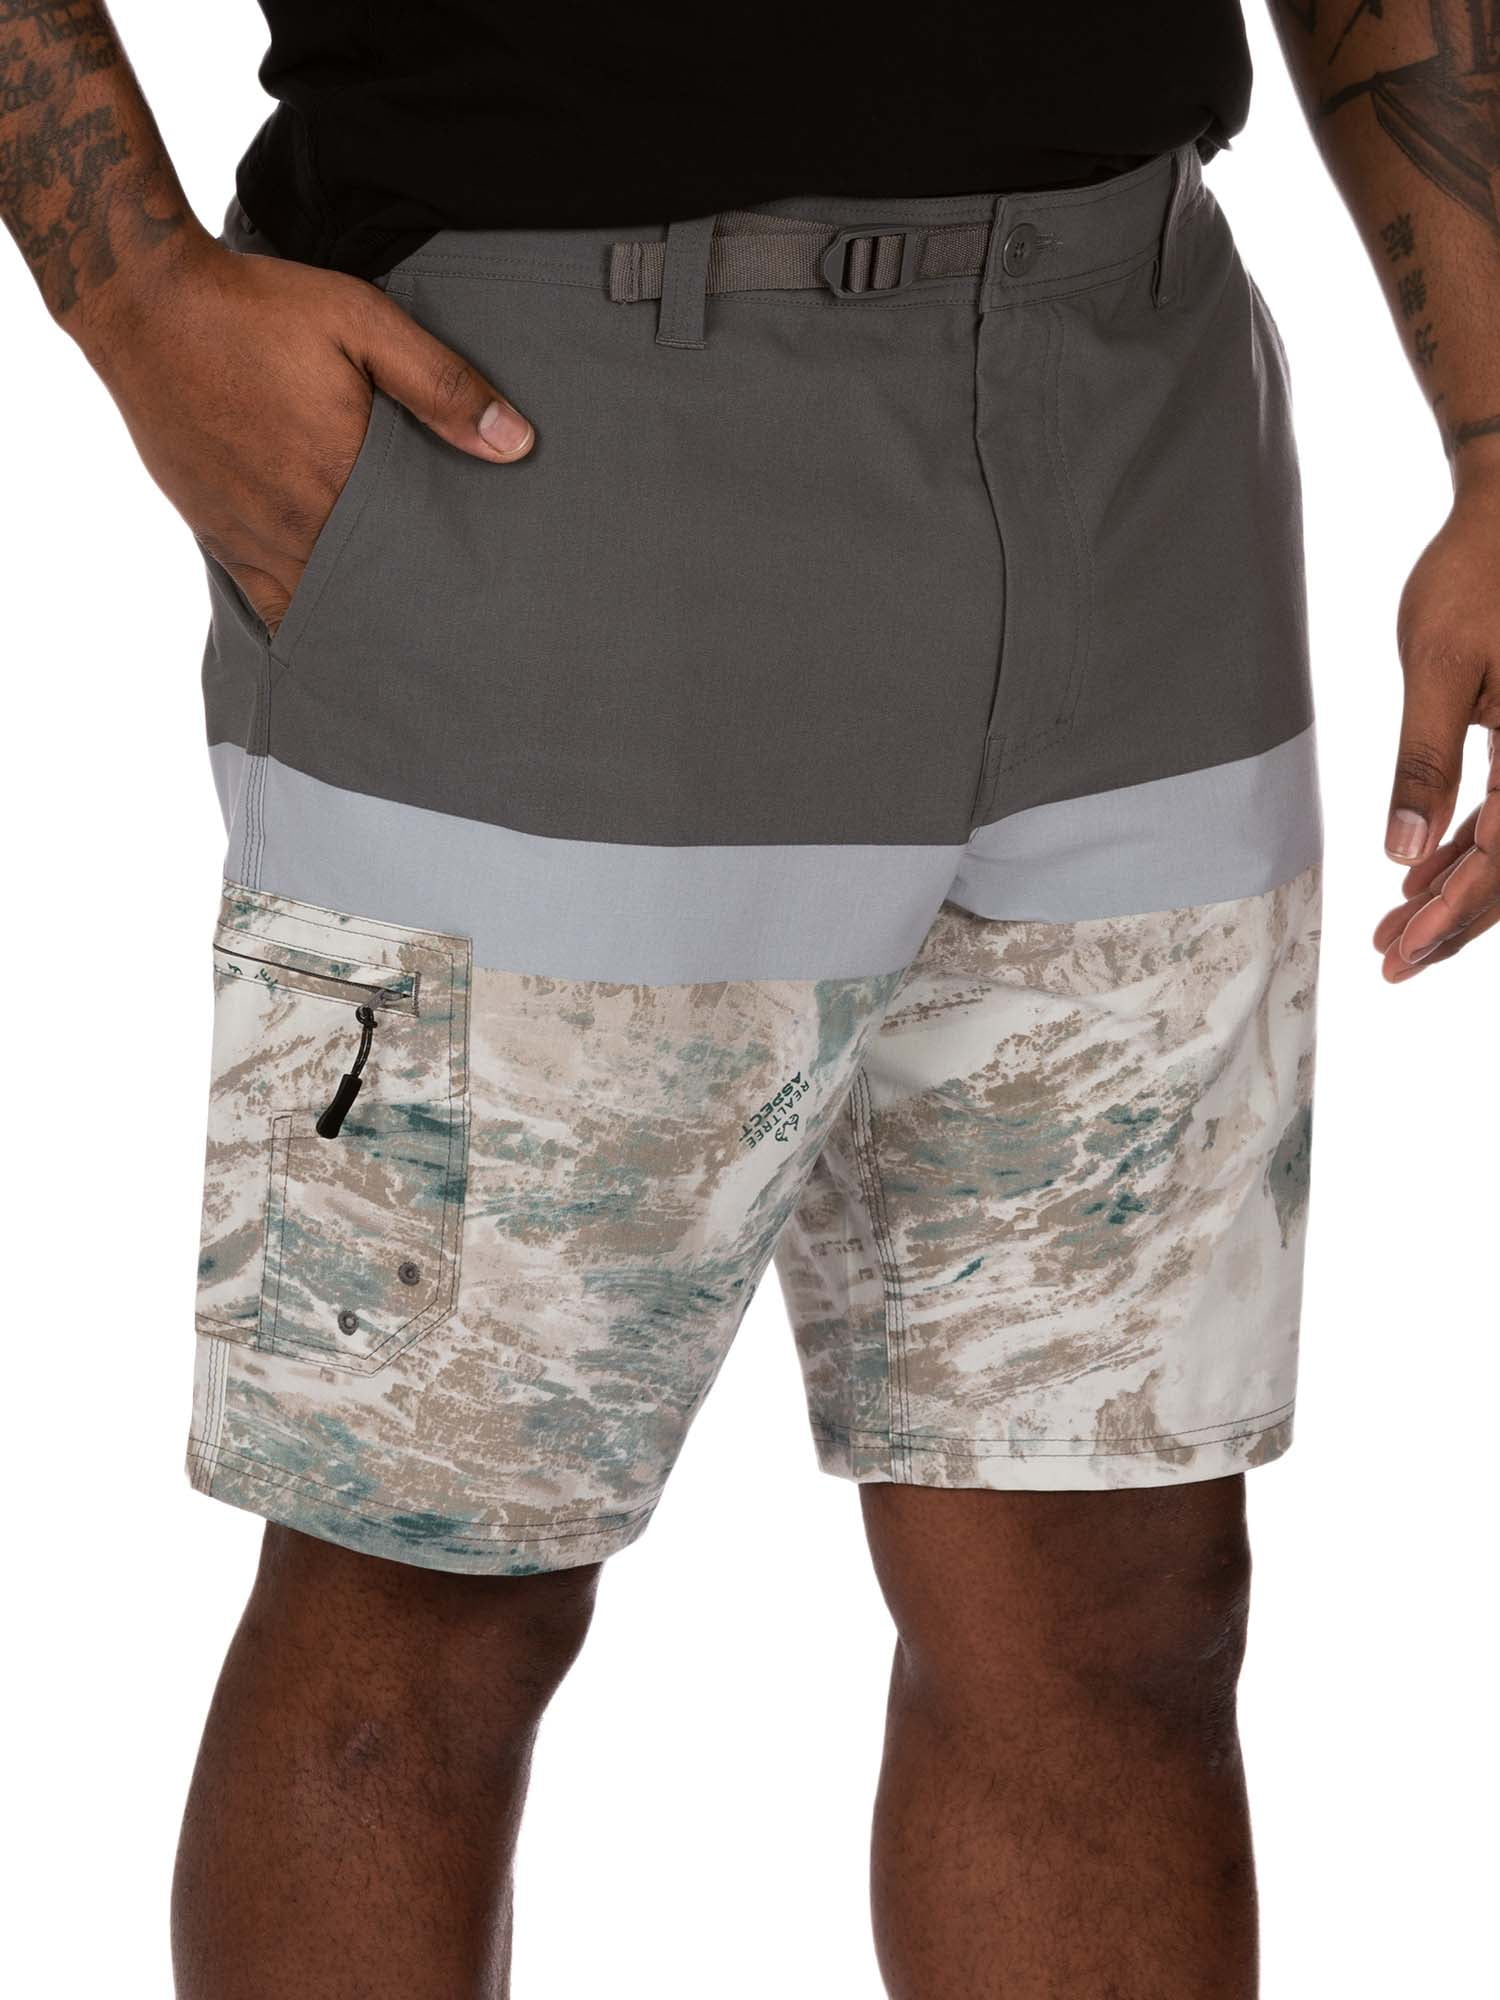 Realtree Men's Performance Hybrid Fishing Shorts (Arctic or Estuary) from $8.27 + Free Shipping w/ Walmart+ or on $35+